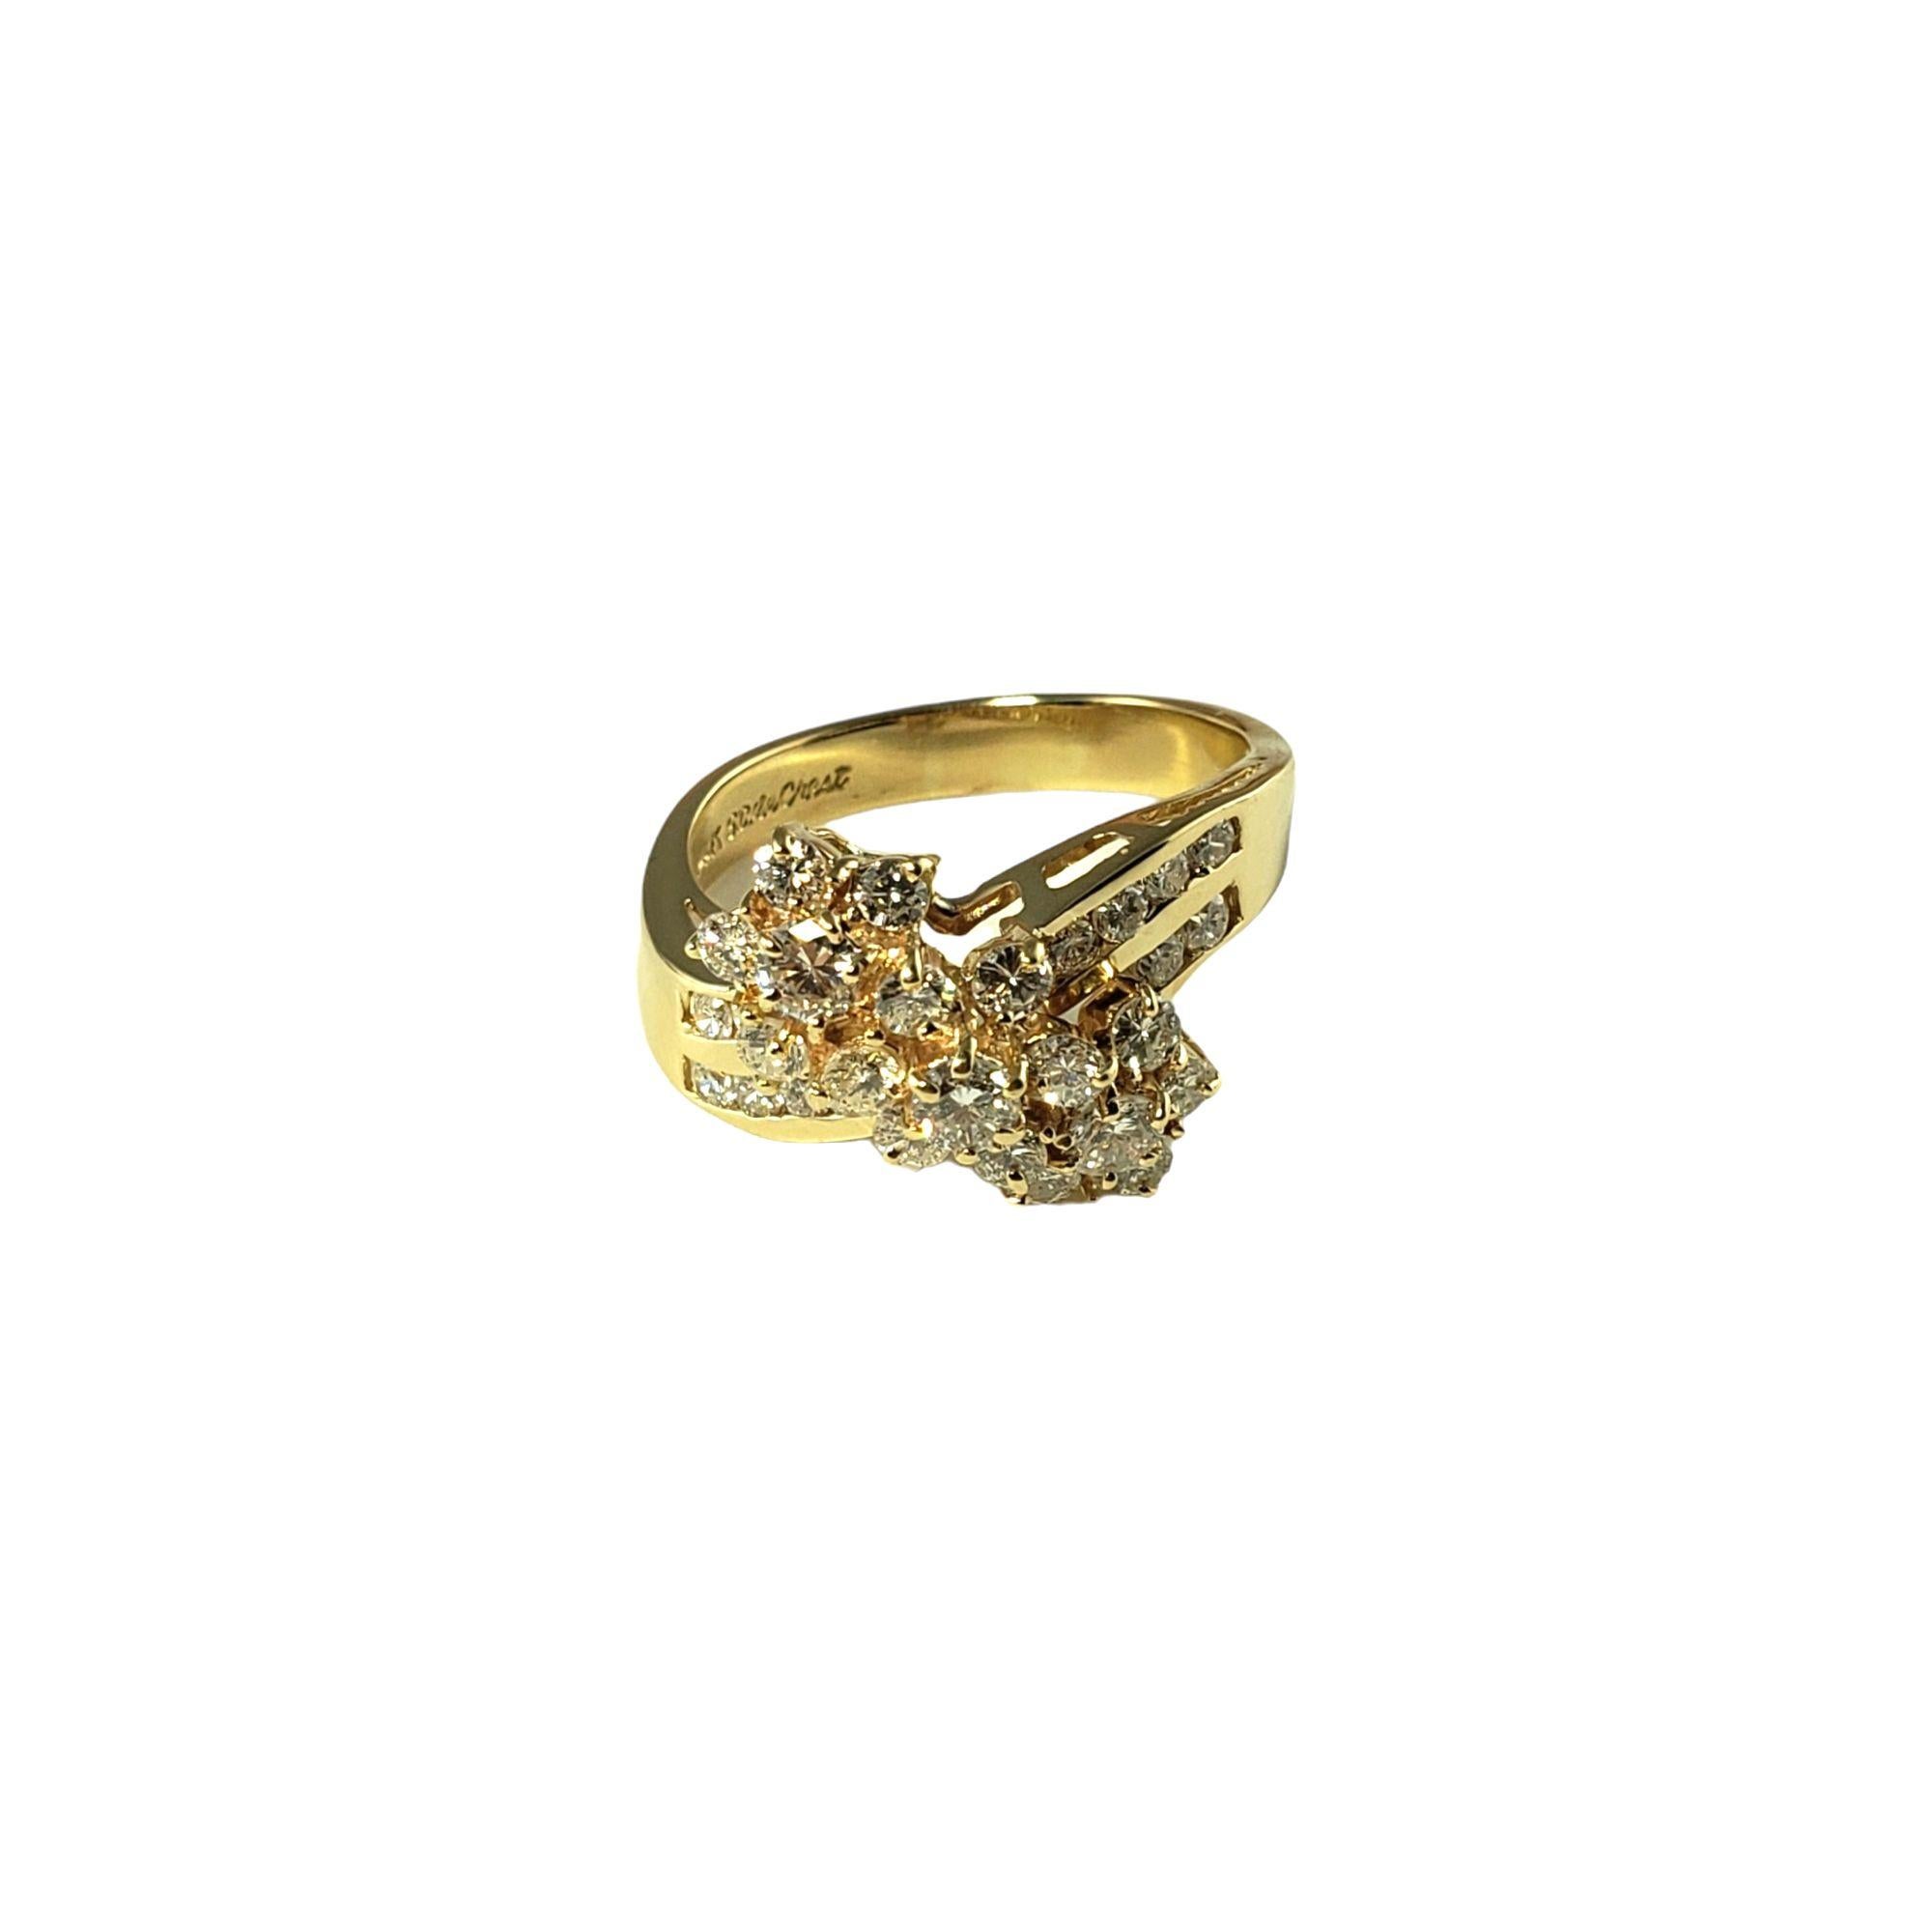 Vintage 14 Karat Yellow Gold Diamond Cluster Ring Size 8.5-

This sparkling ring features 29 round brilliant cut diamonds set in beautifully detailed 14K yellow gold. Width: 17 mm. Shank: 3 mm.

Total diamond weight: 1.24 ct.

Diamond color: